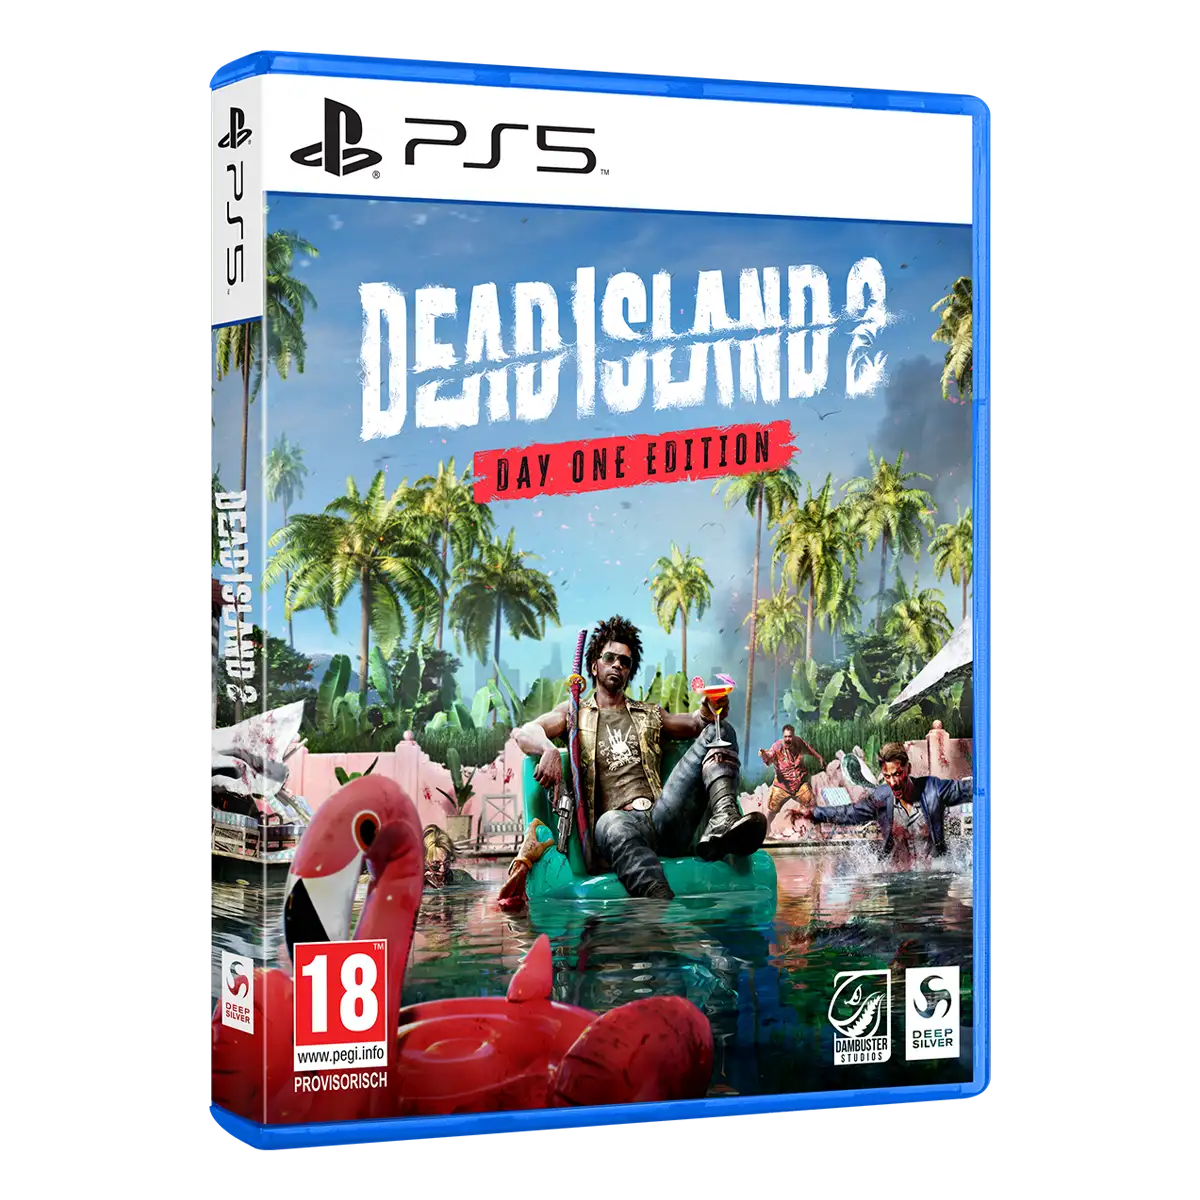 Dead Island 2 Day One Edition PS5 3D Packshot